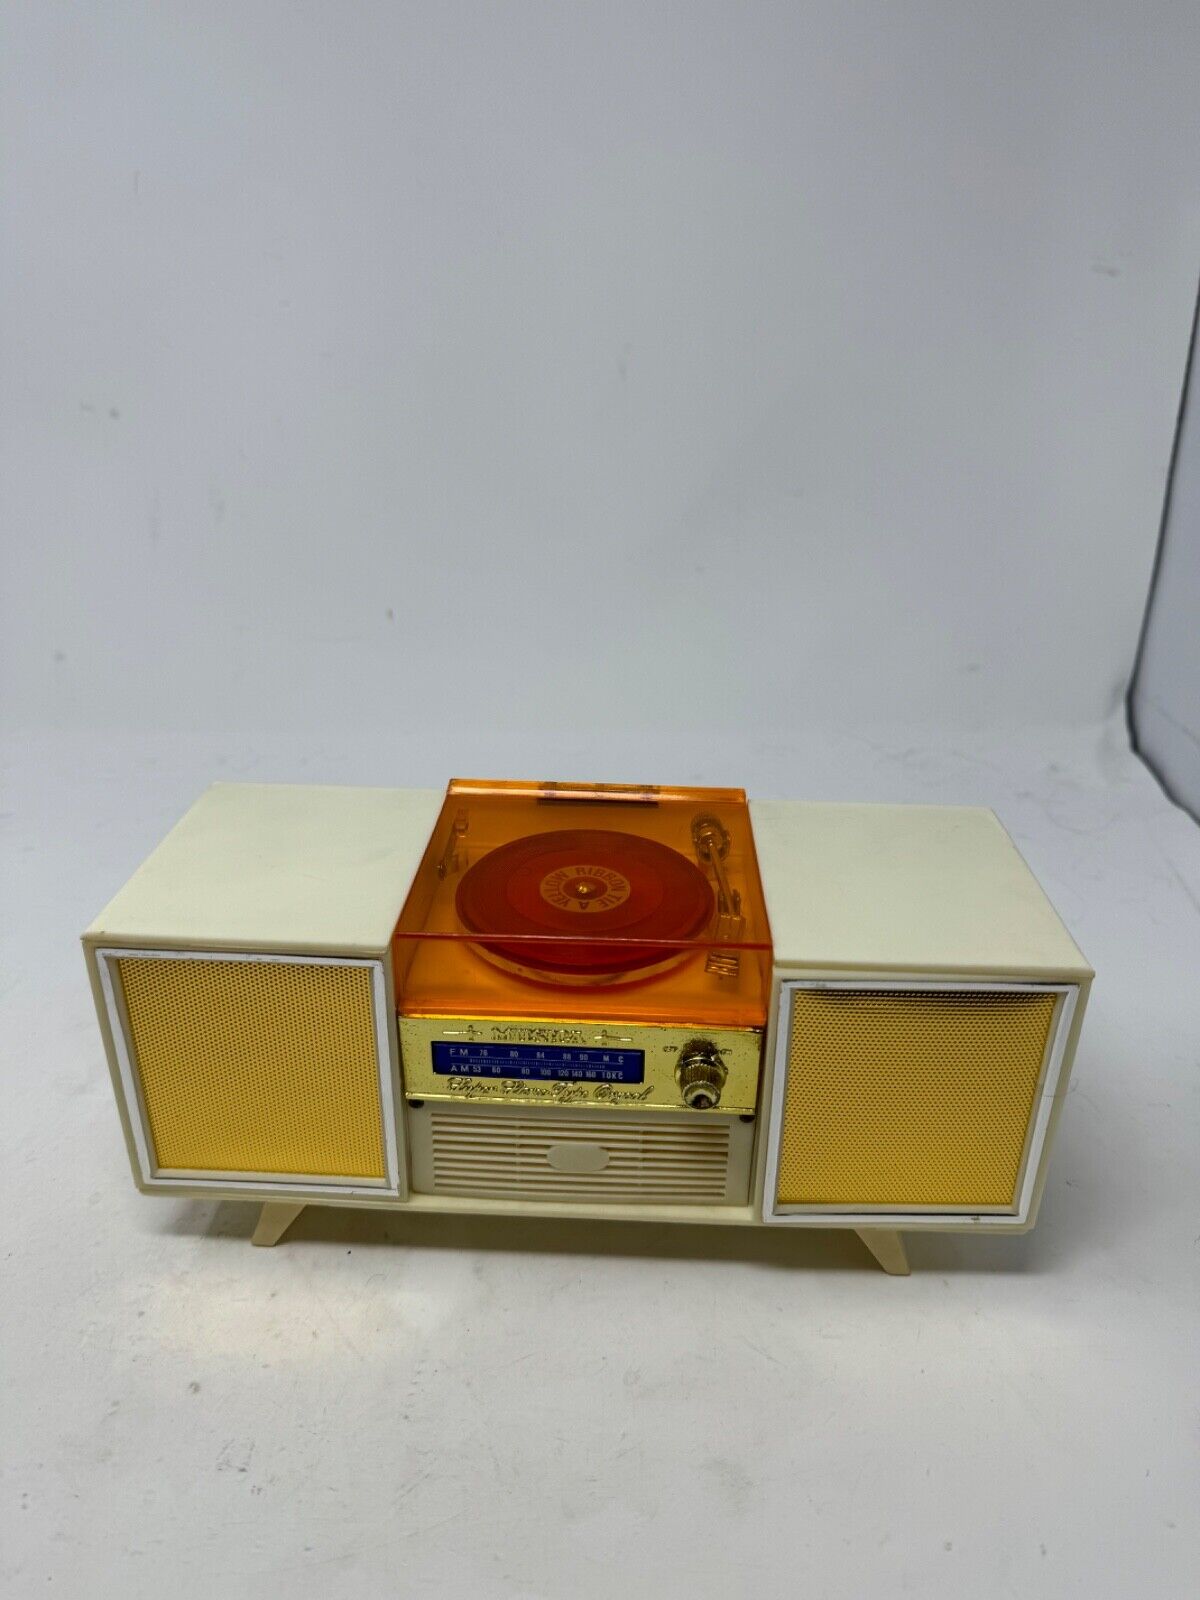 VTG MCM NEAT Musica Stereo Record Player Turntable Jewelry Music Box Hong Kong